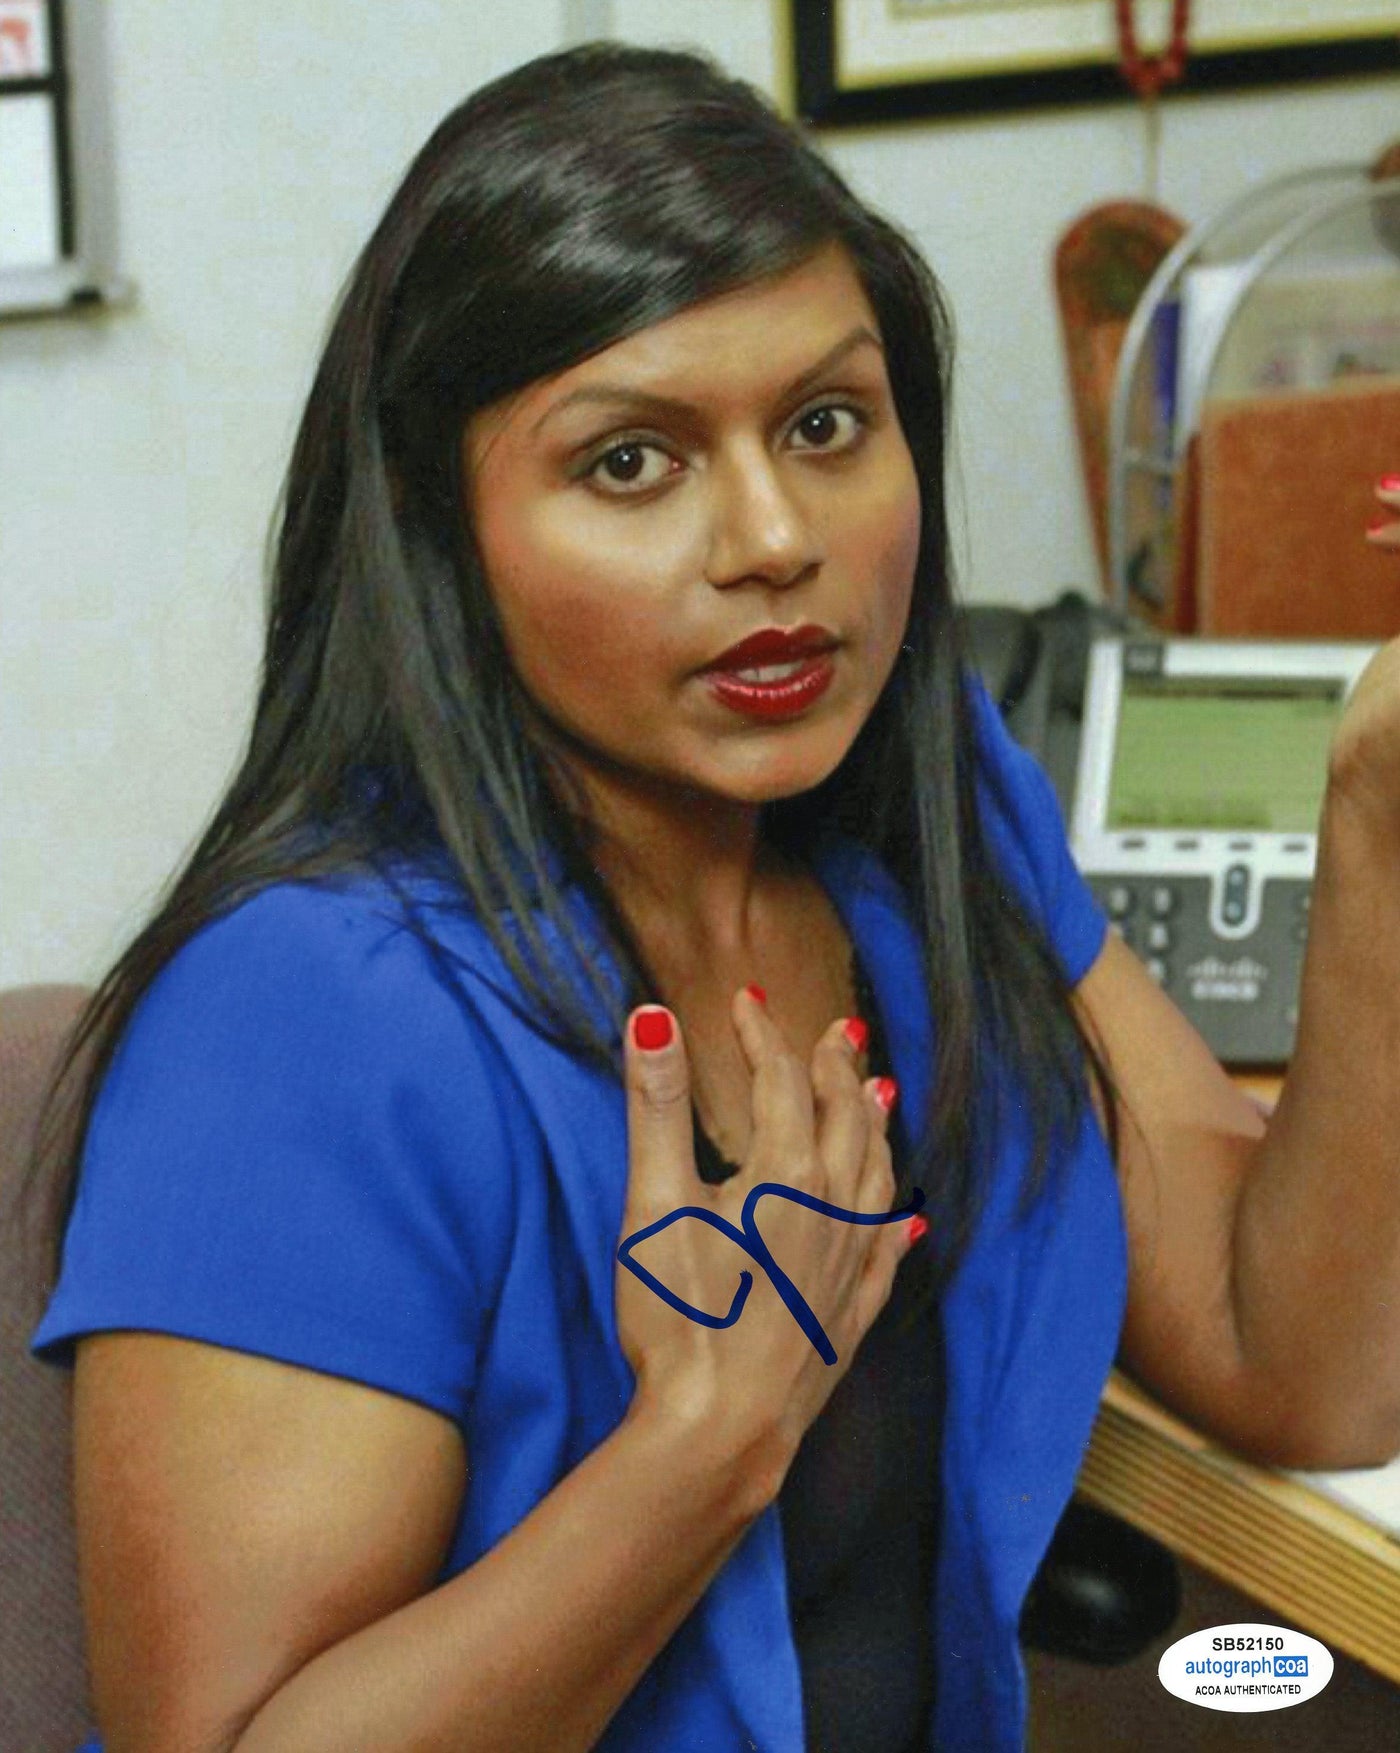 Mindy Kaling Signed 8x10 Photo The Office Kelly Autographed ACOA